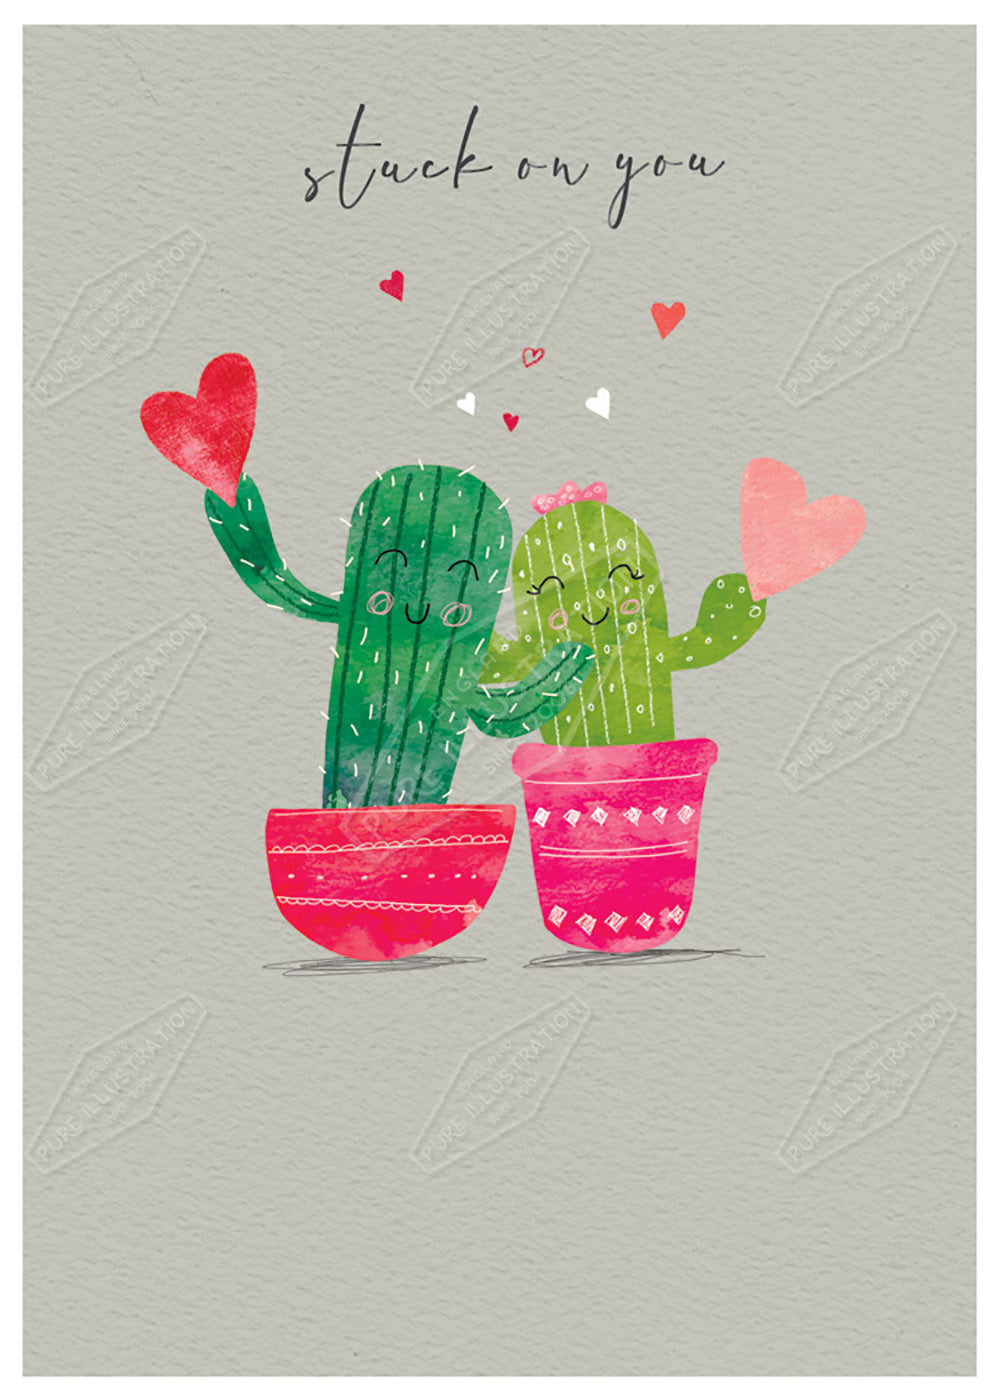 Valentines / Anniversary Greeting Card Design Illustration by Cory Reid for Pure Art Licensing Agency & Surface Design Studio